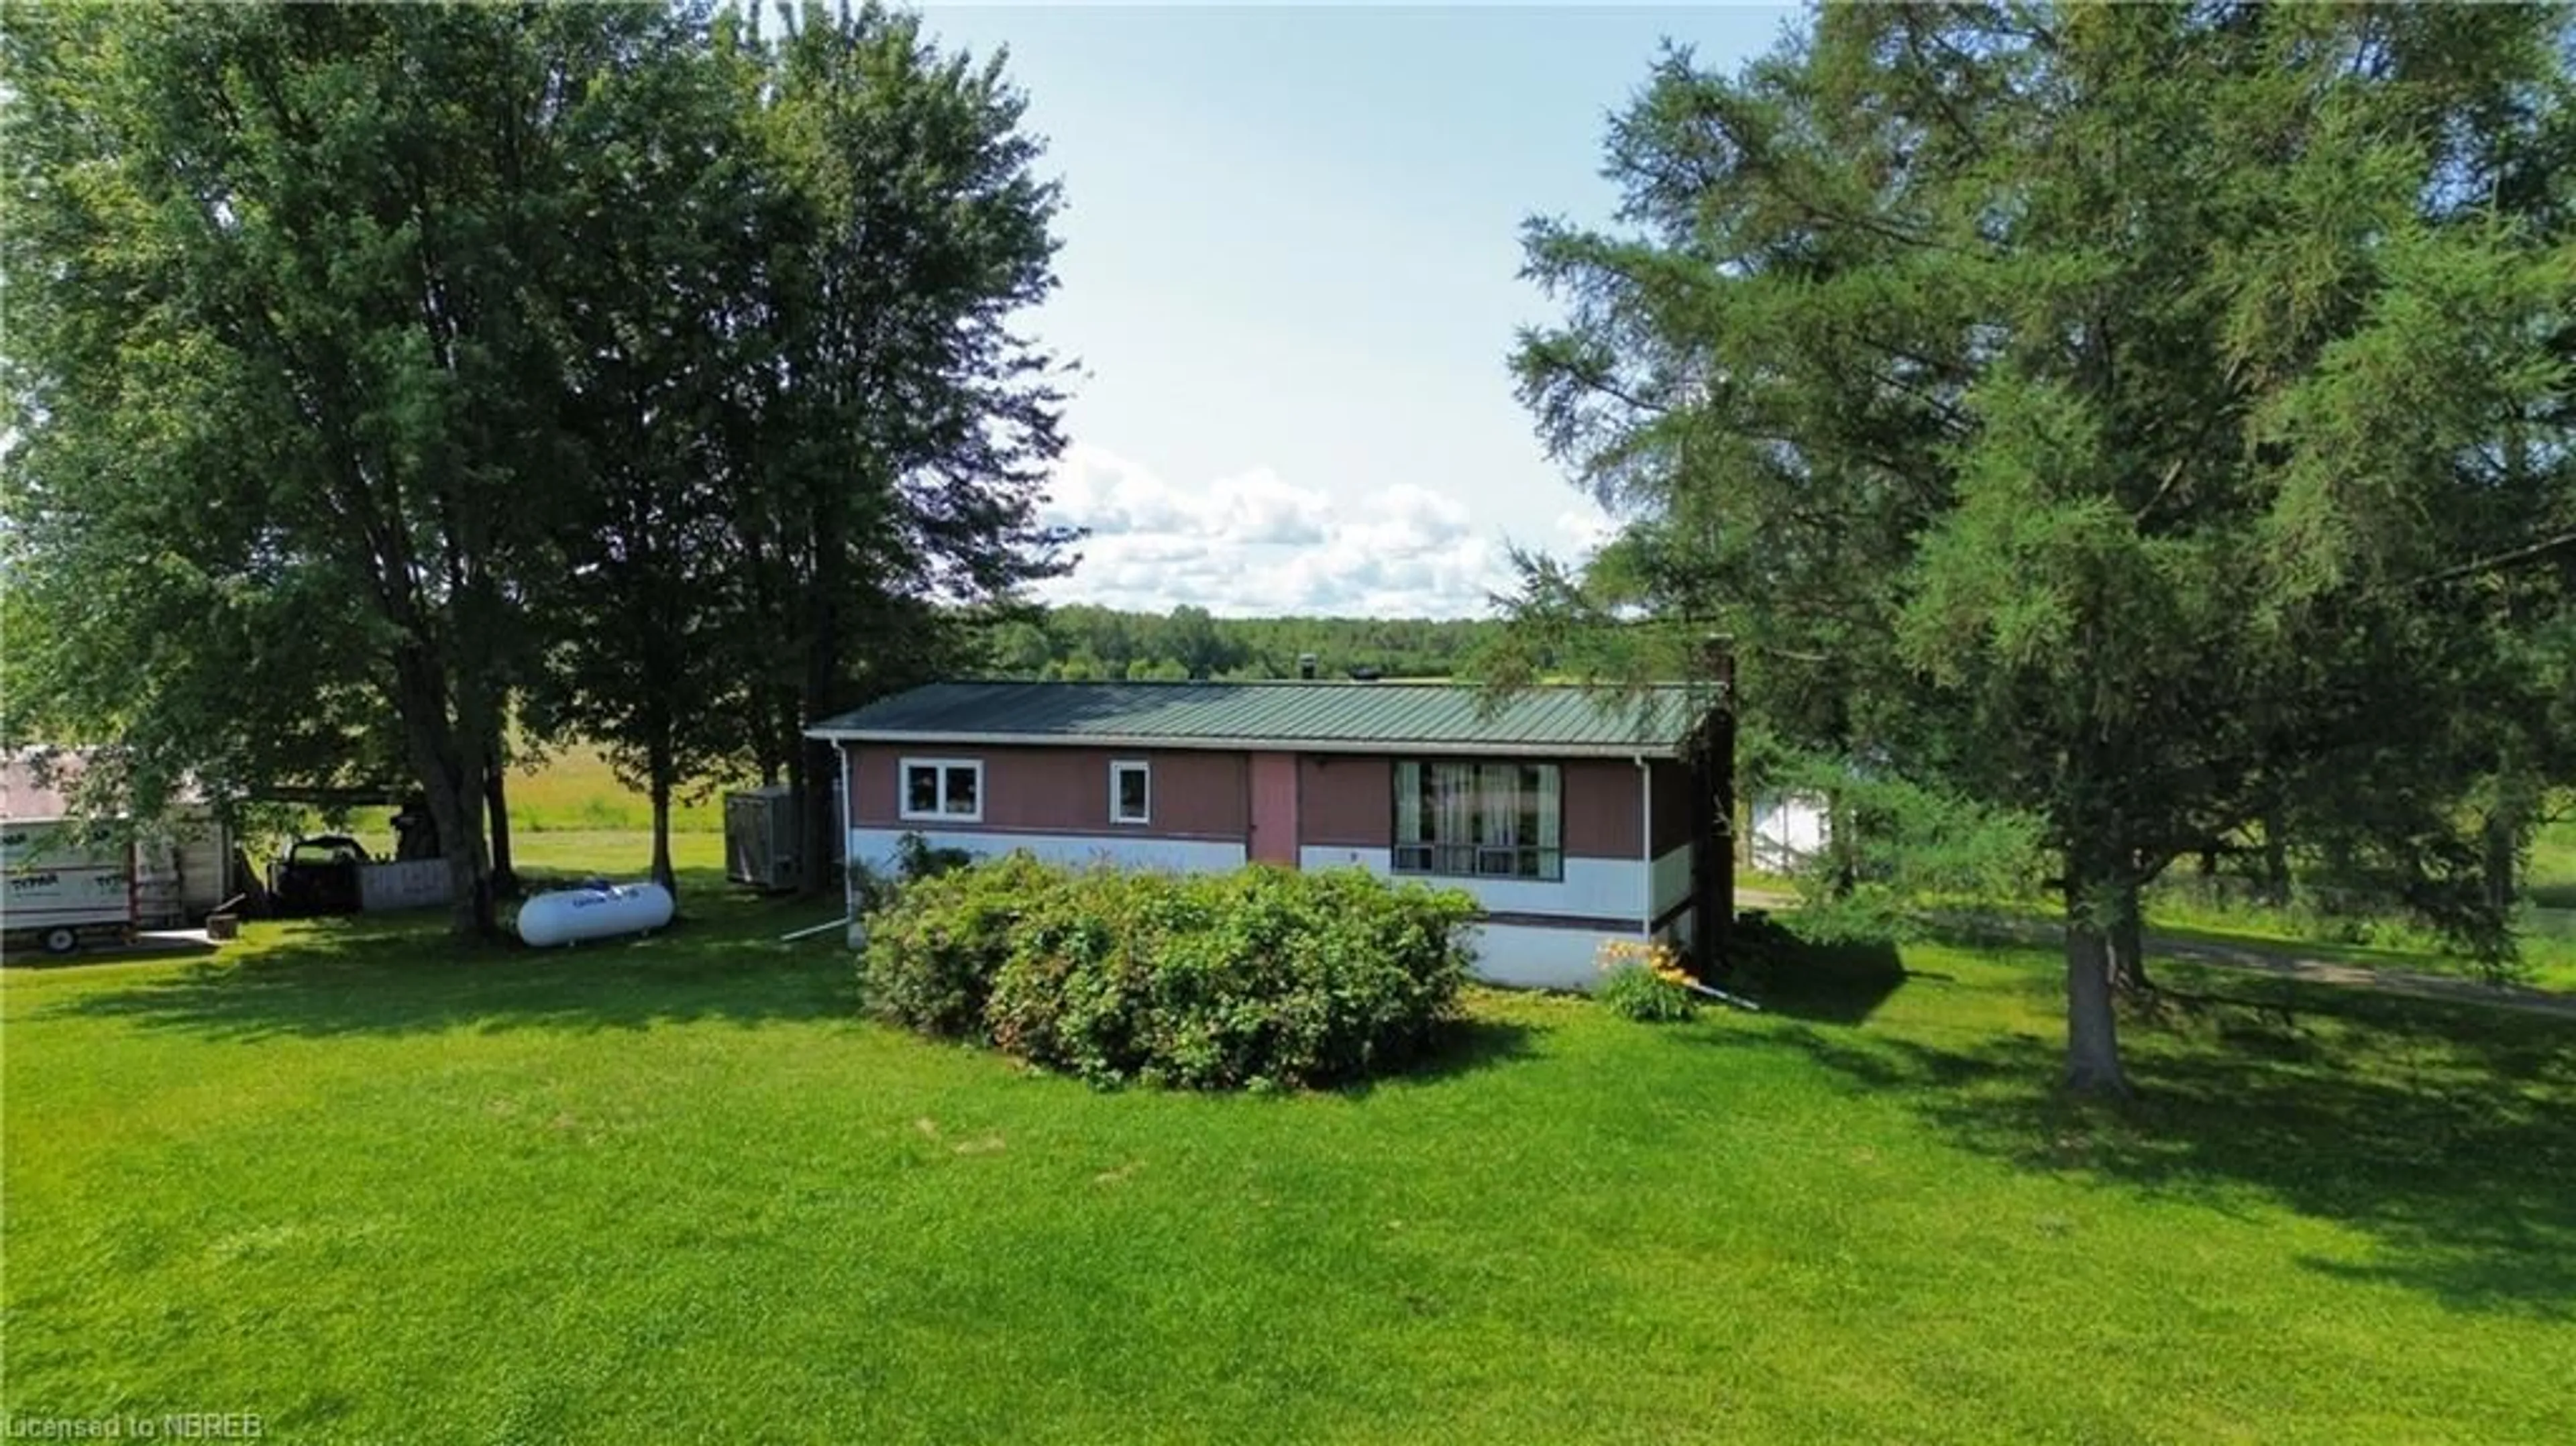 Outside view for 812 Rainville Rd, Verner Ontario P0H 2M0